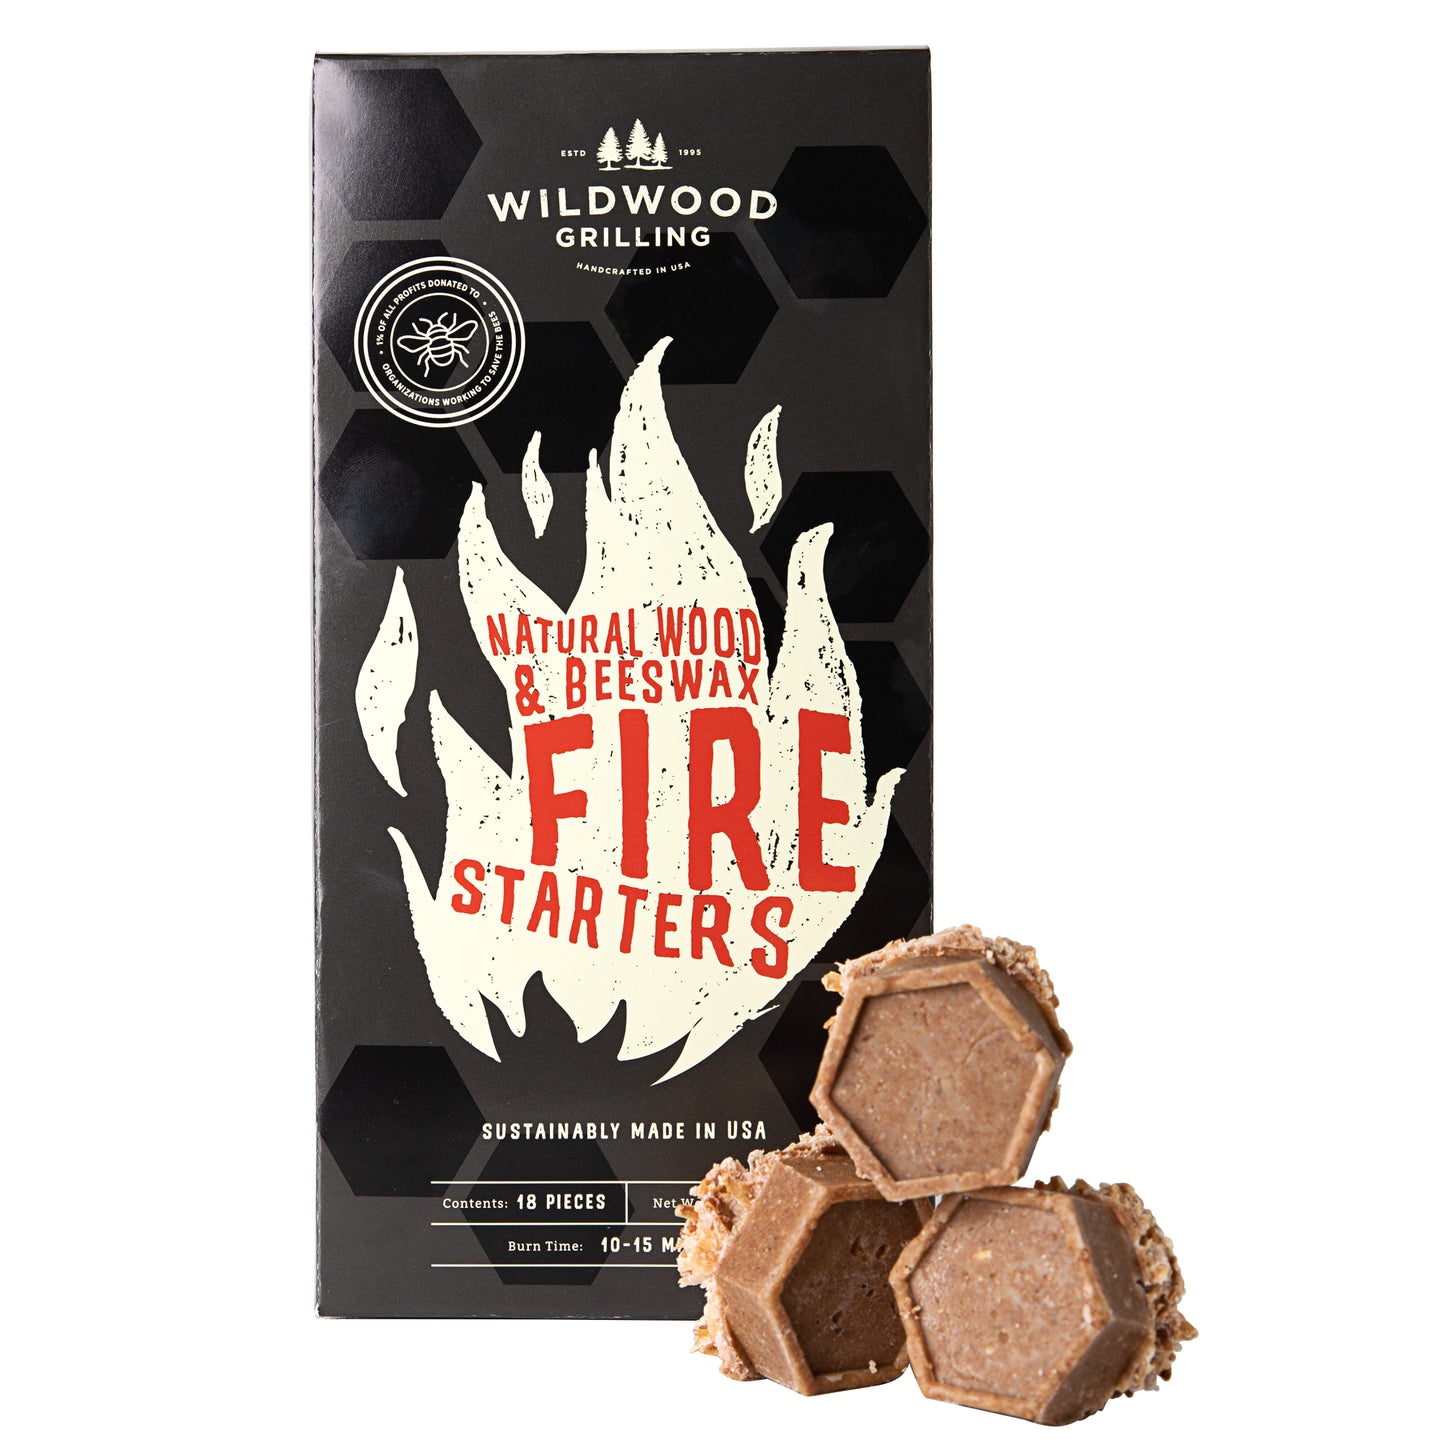 Natural Wood and Beeswax Fire Starters